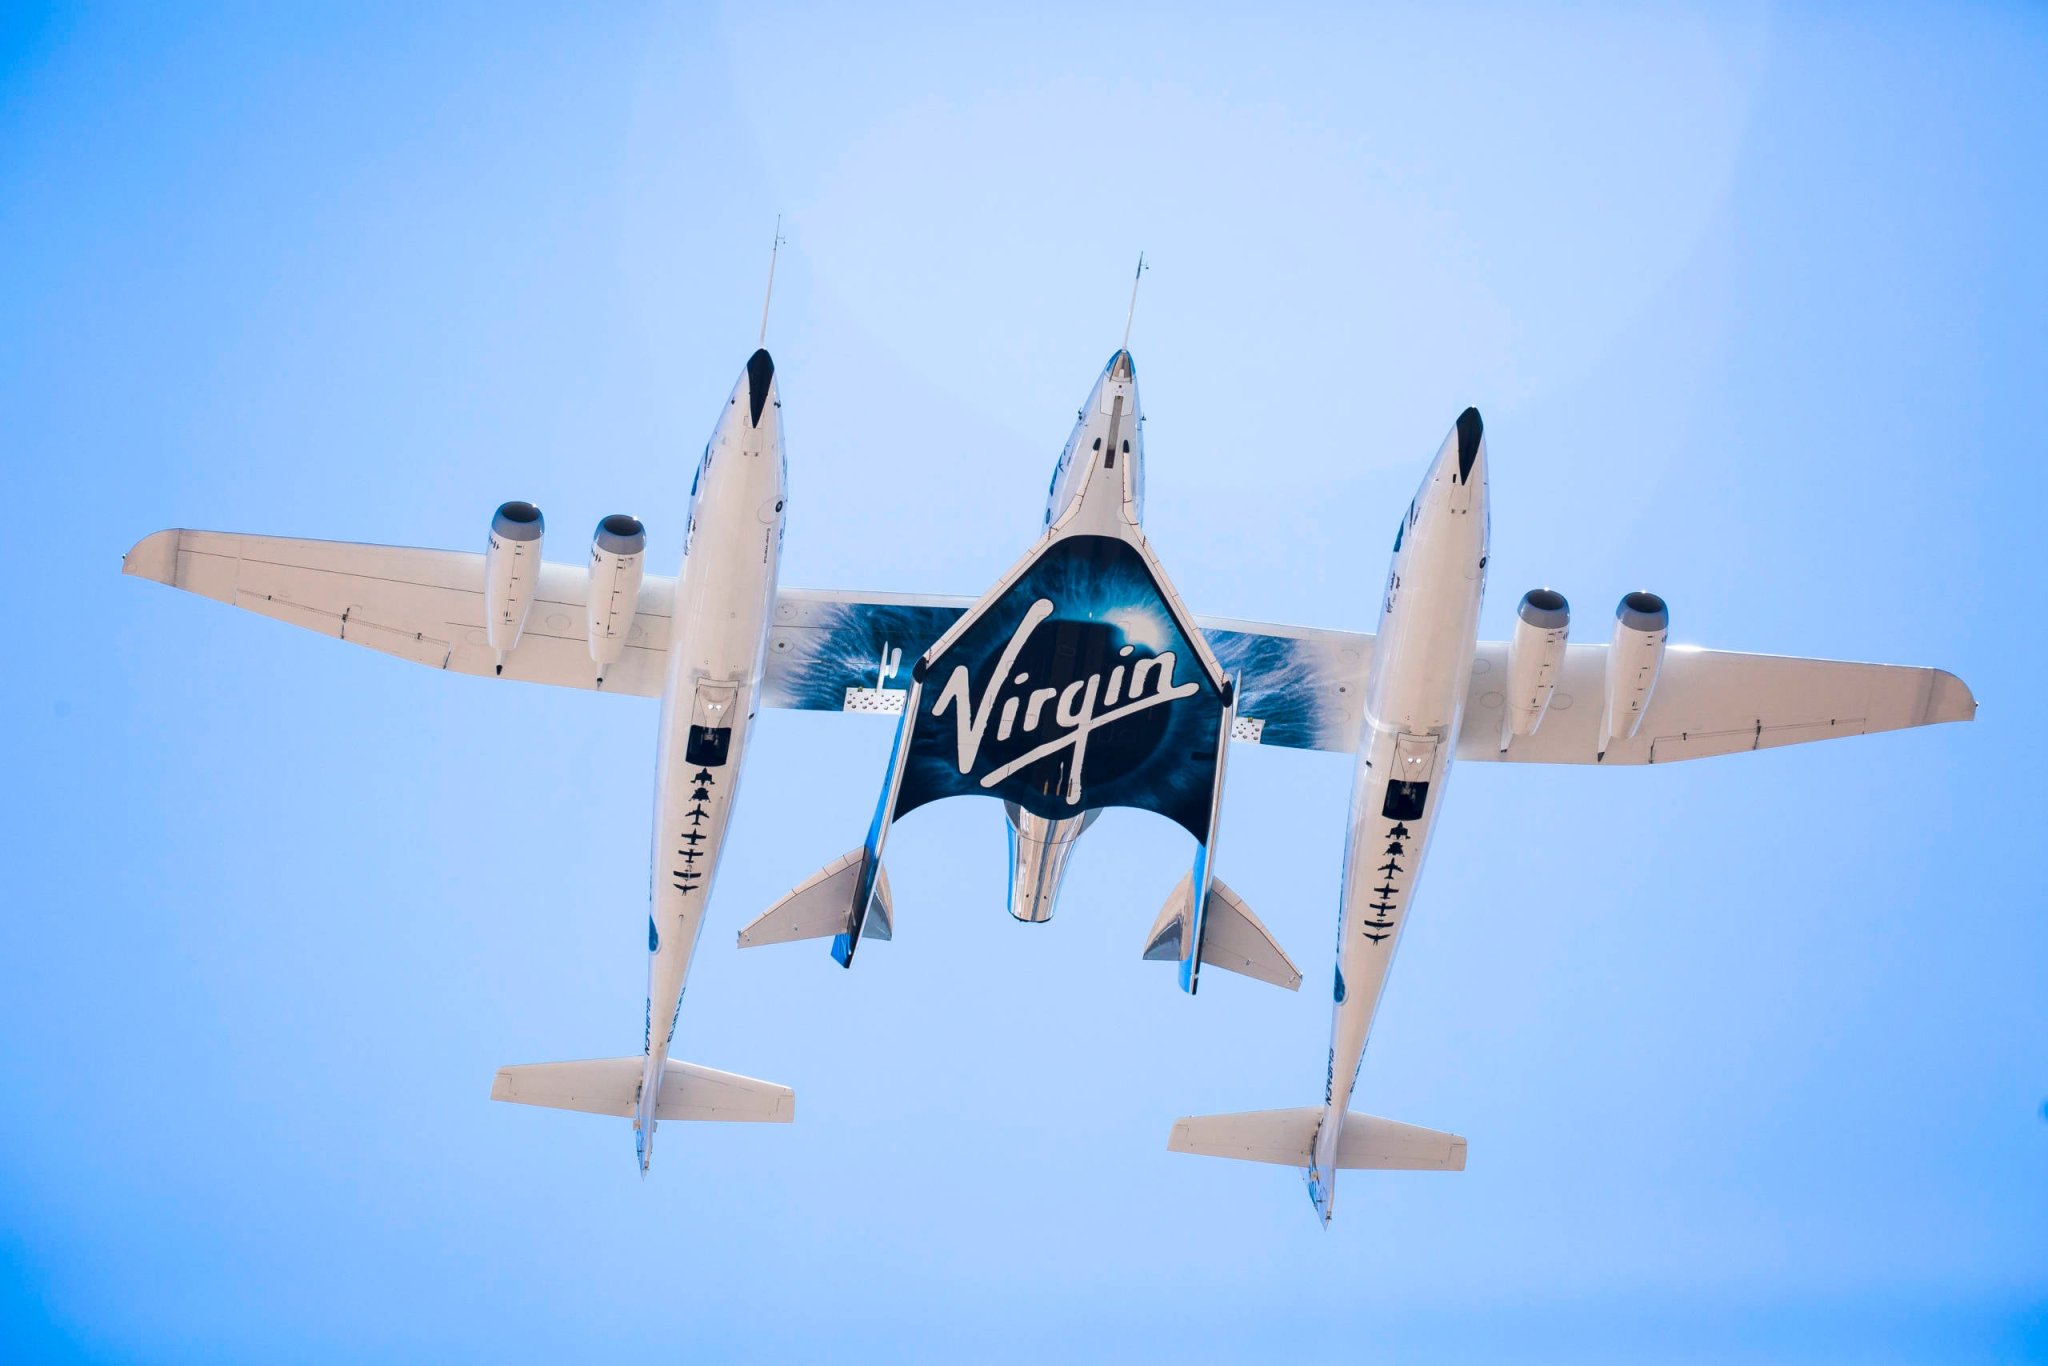 You can now book your $450,000 ticket to fly into space with Virgin Galactic